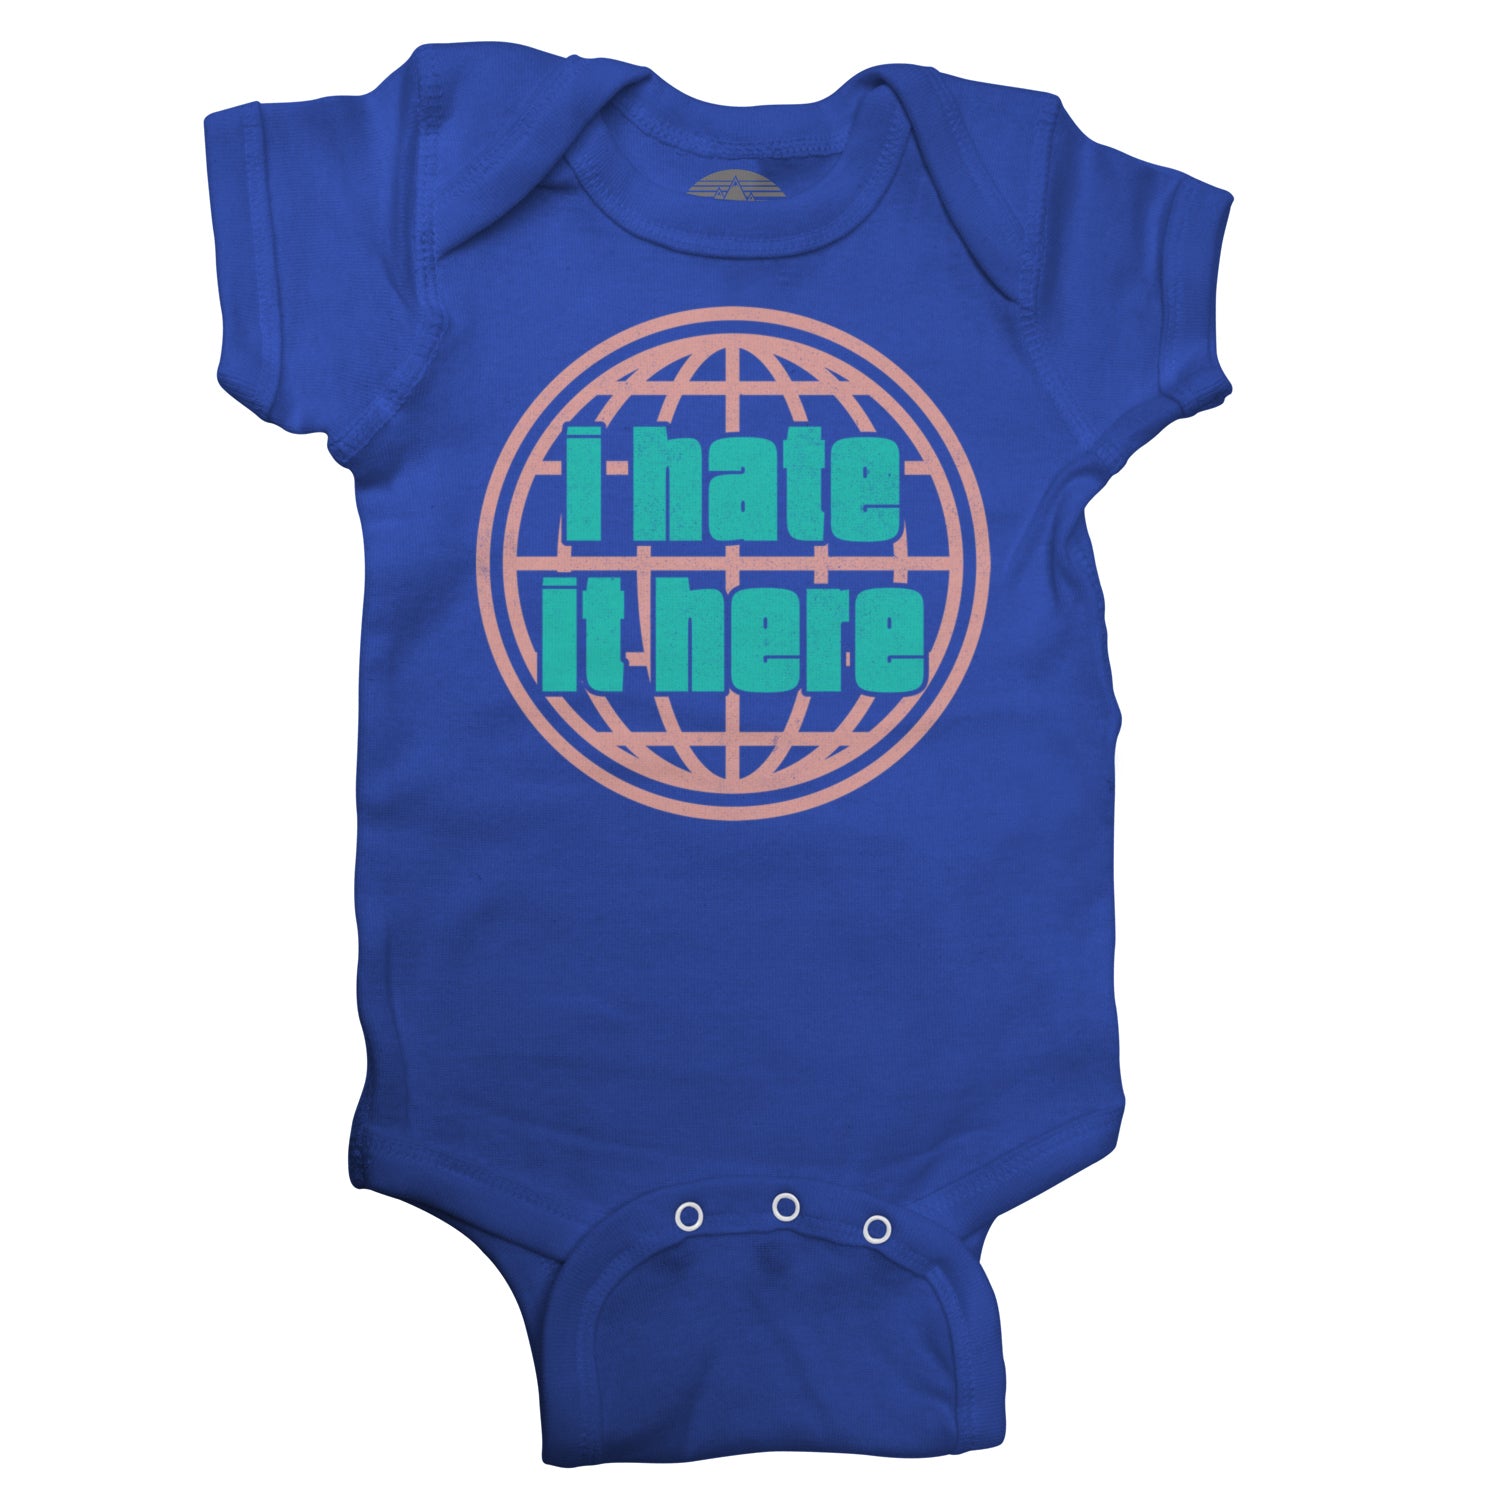 I Hate It Here Infant Bodysuit - Unisex Fit